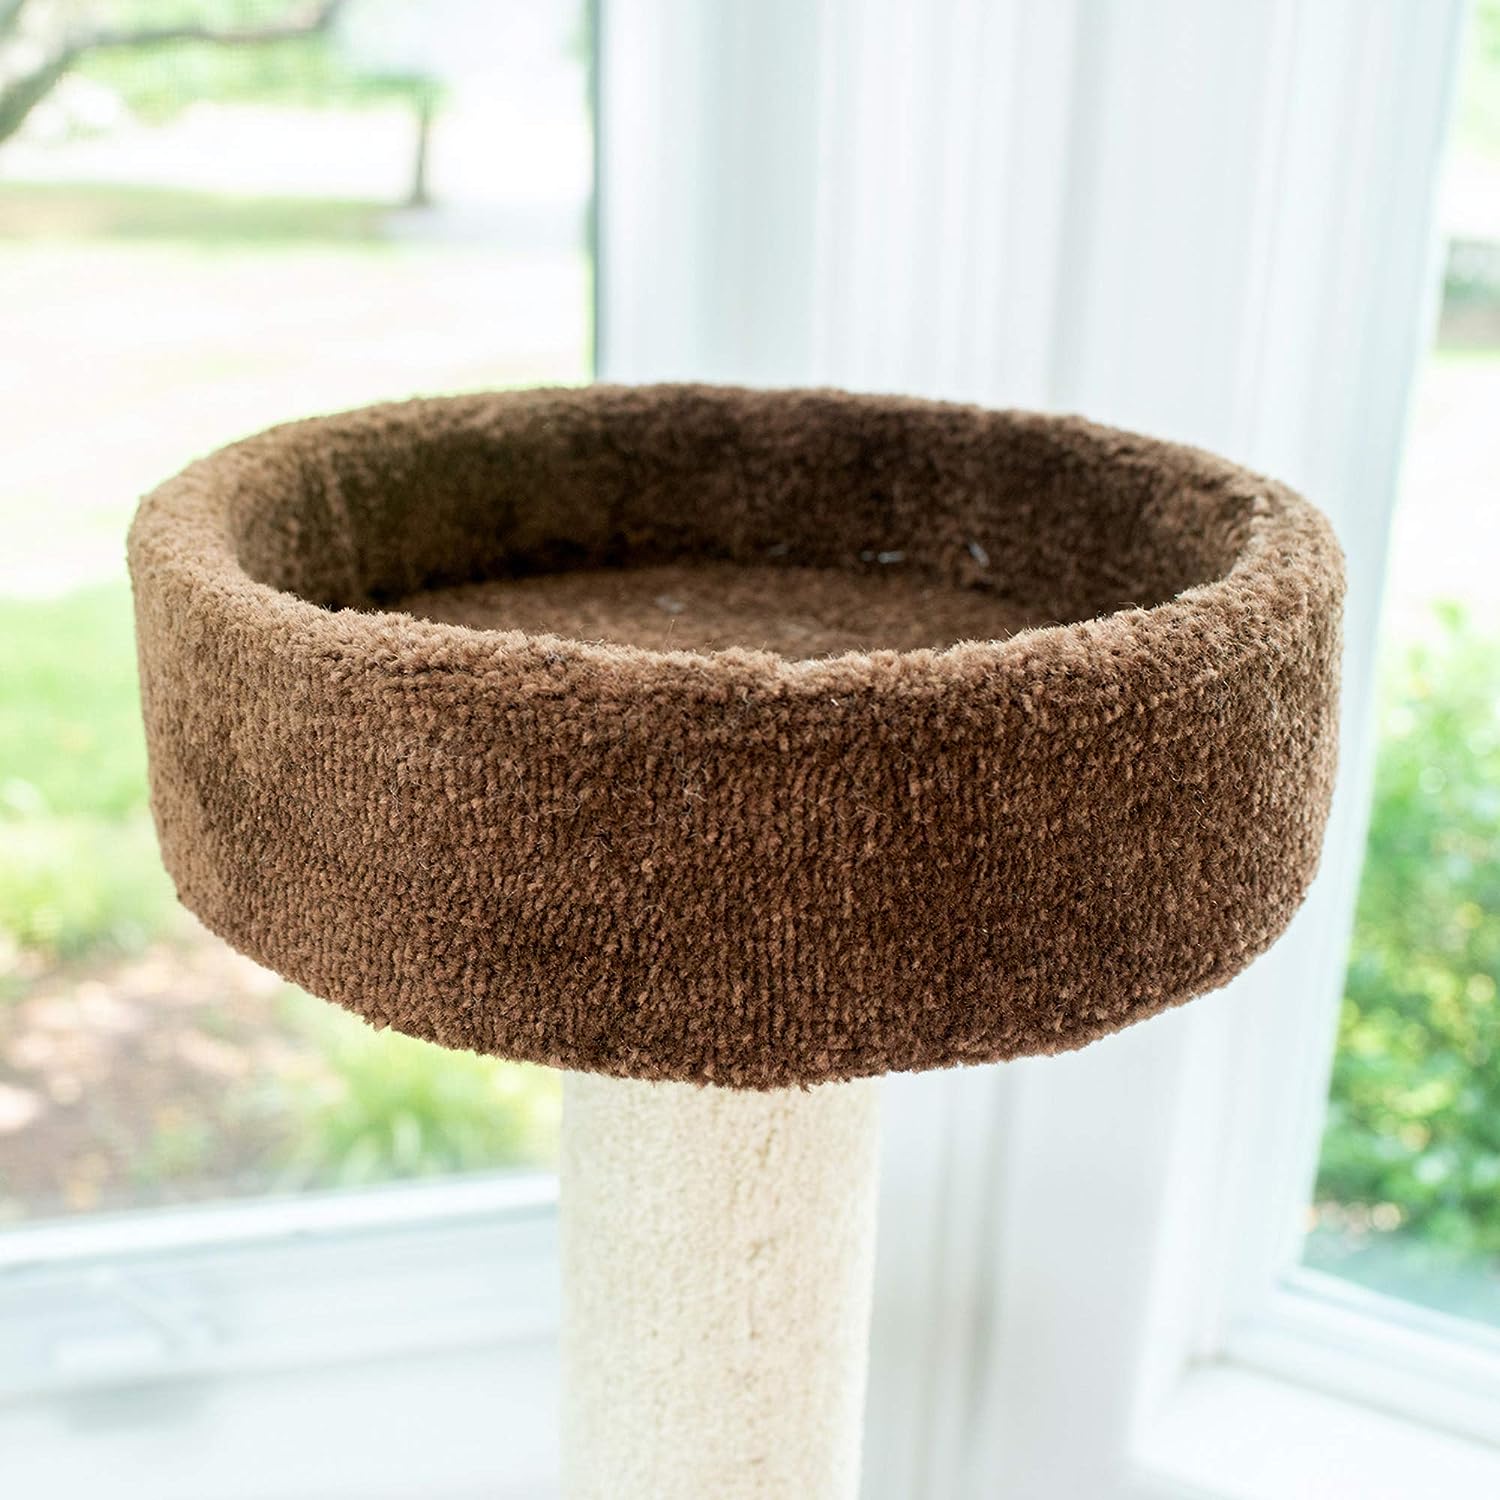 Armarkat 3-Level Carpeted Cat Tree Real Wood Condo F5602, Kitten Playhouse Climber Activity Center, Brown